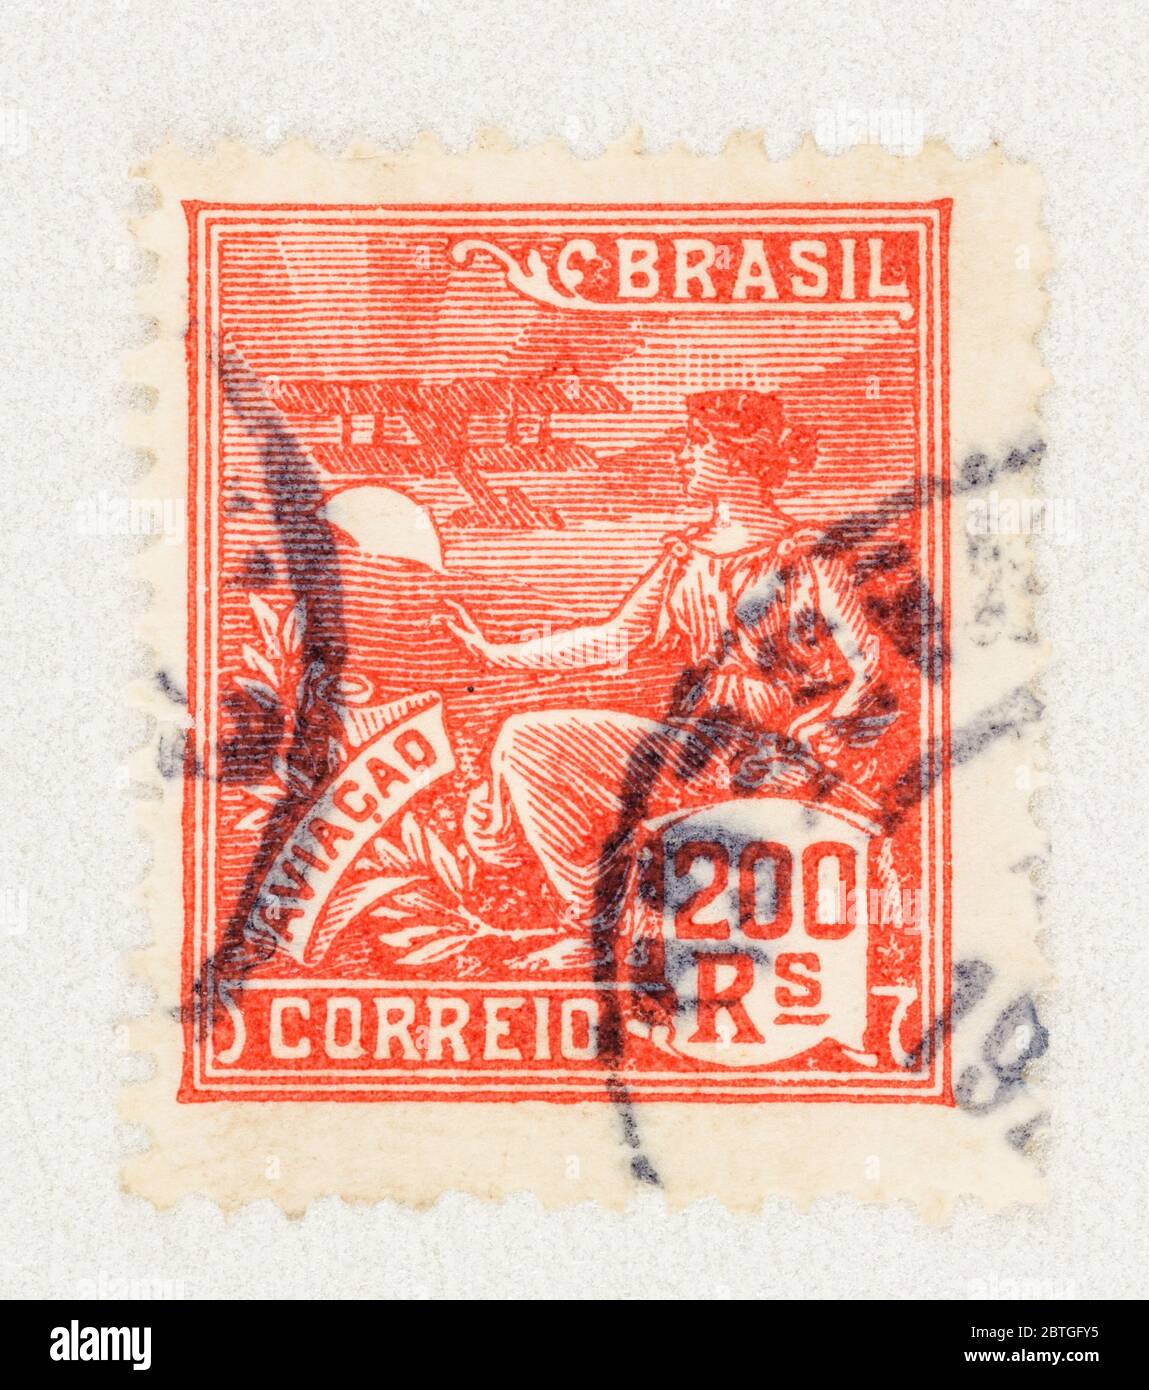 SEATTLE WASHINGTON - May 23, 2020:  Close up 1920s Brazil stamp featuring woman and airplane. Stock Photo